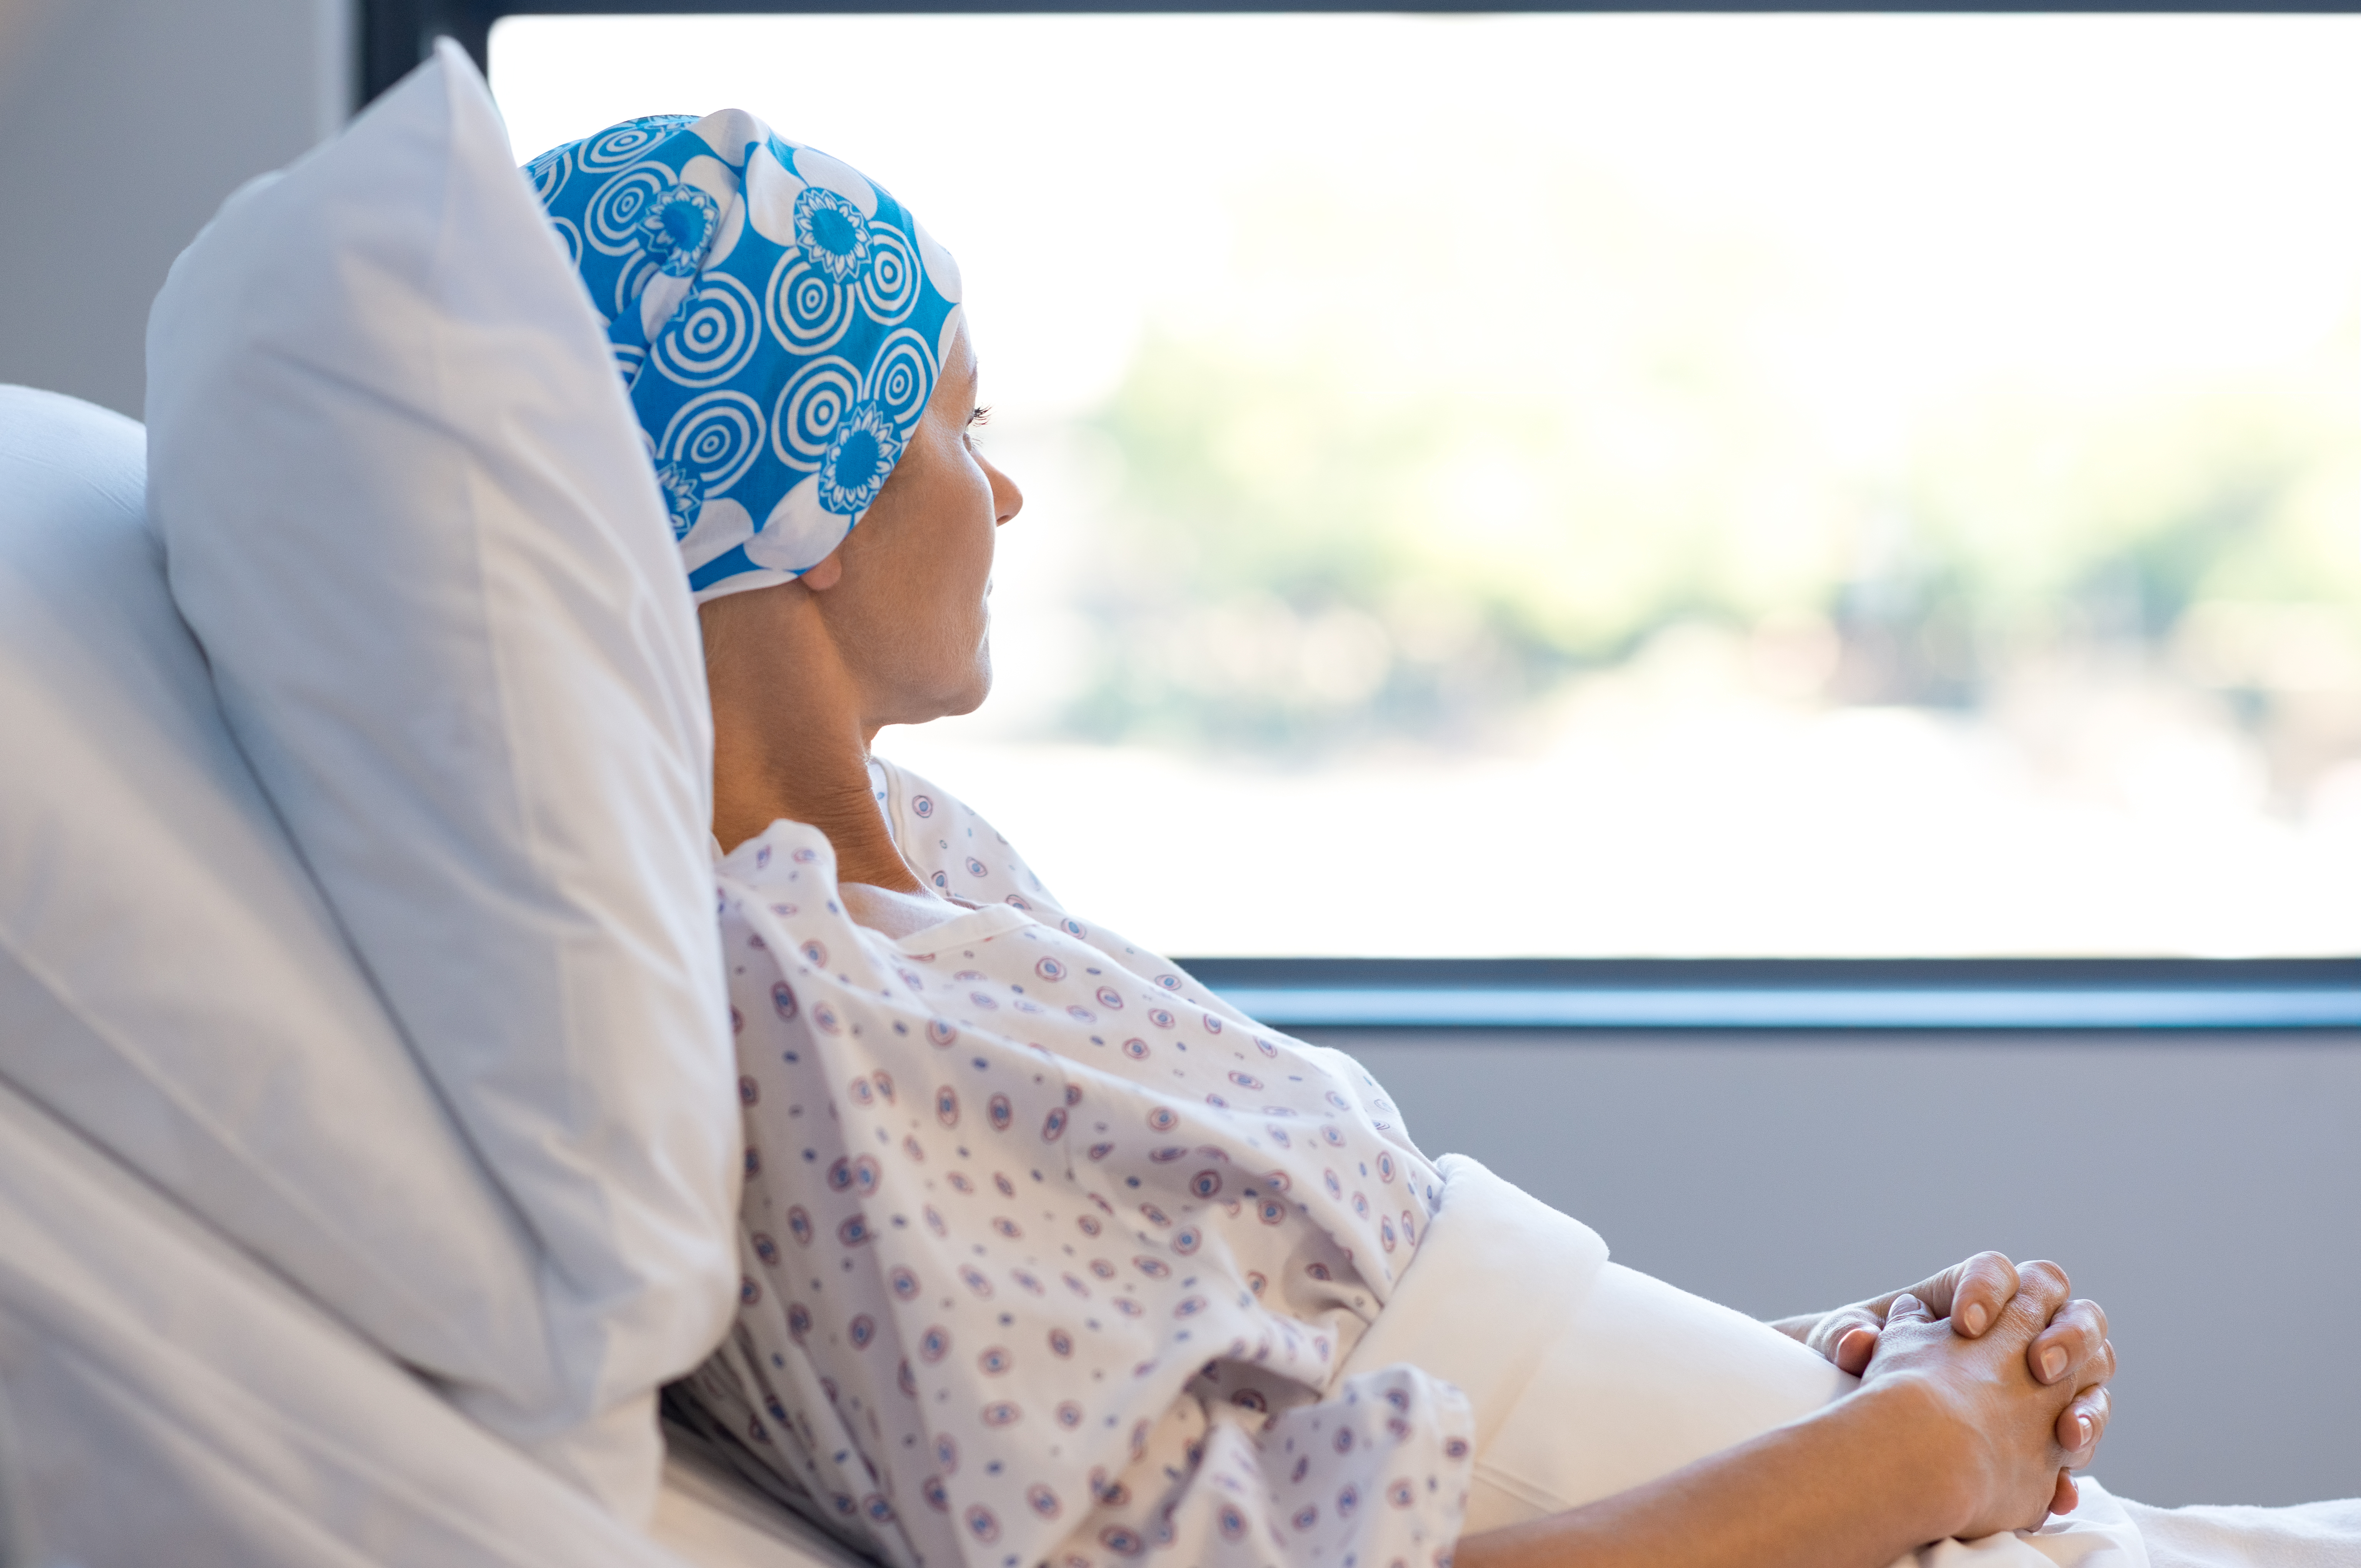 A woman in a hospital bed suffering from cancer | Source: Shutterstock